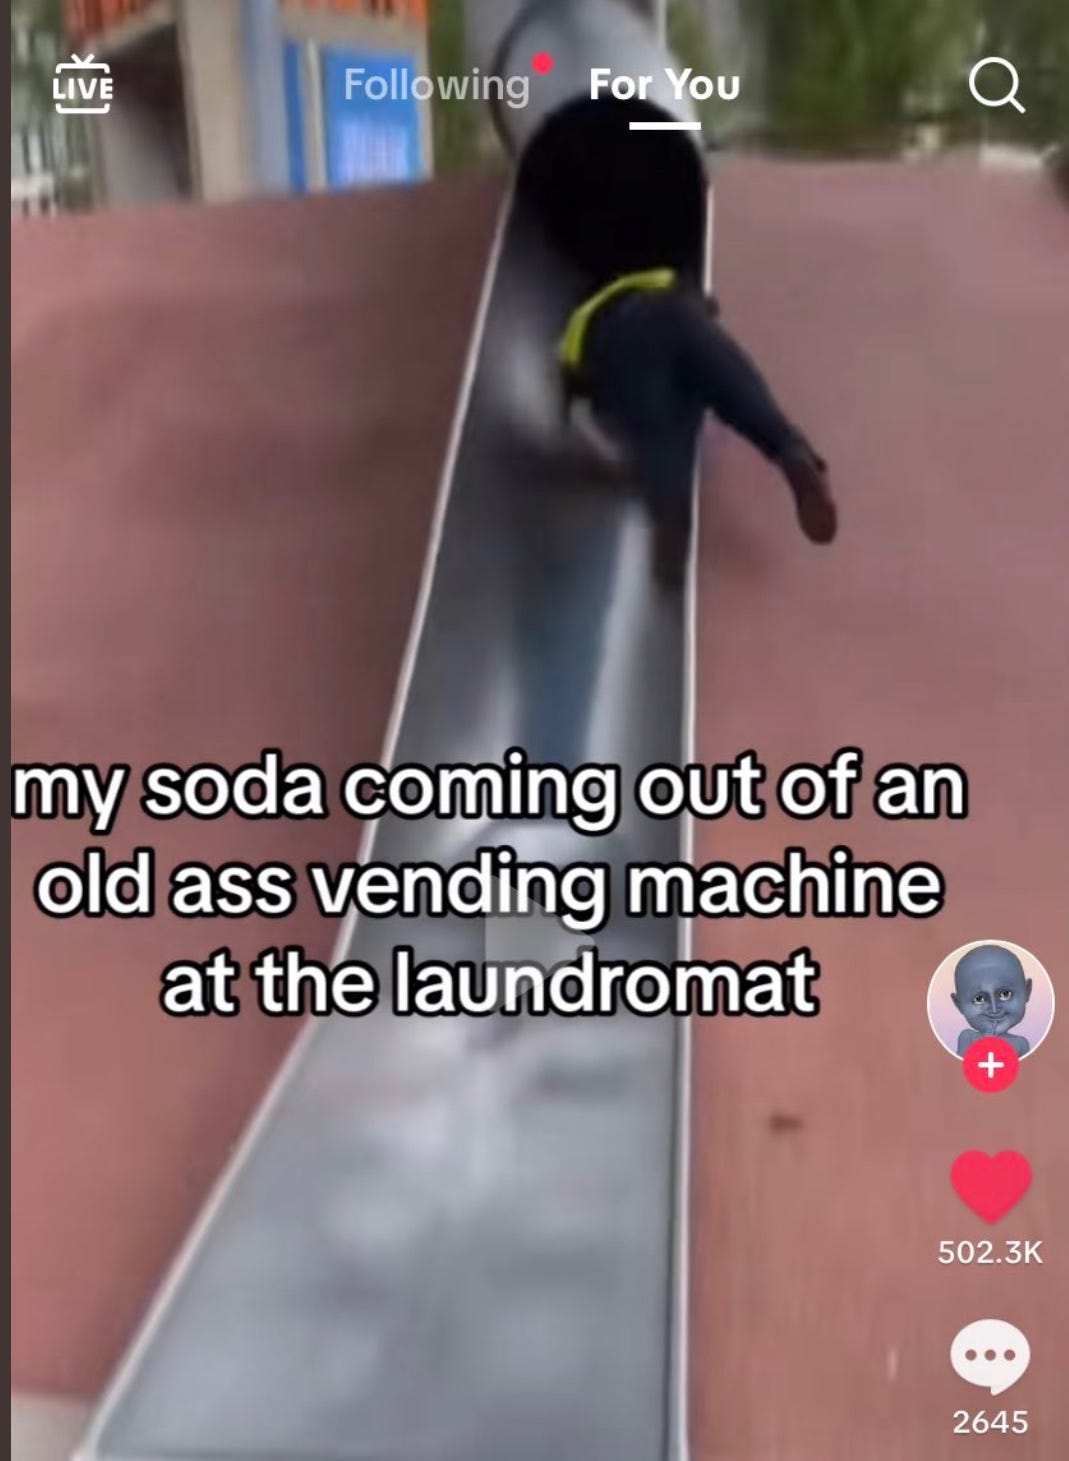 TikTok screenshot of the officer flying out of the slide with text over it that says "my soda coming out of an old ass vending machine at the laundromat"